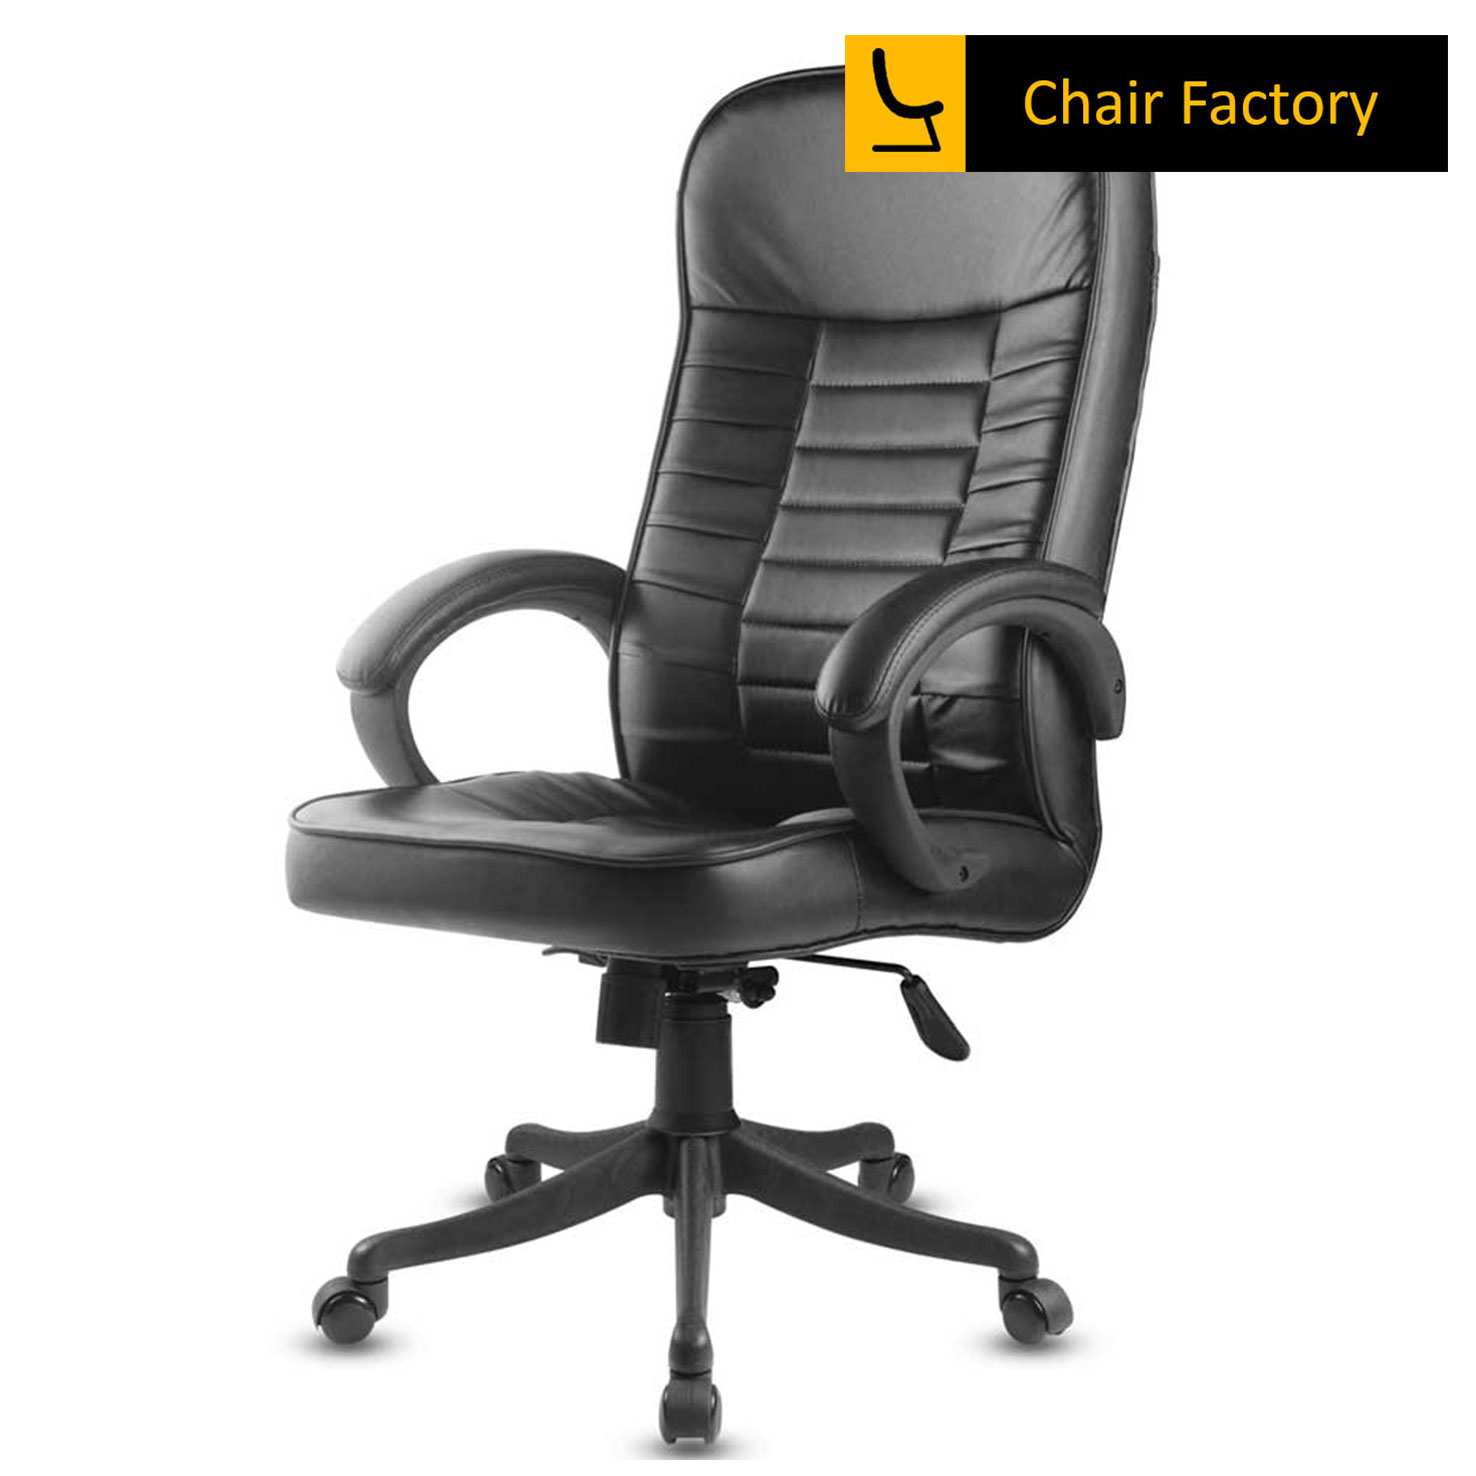 Johnny conference room Chair